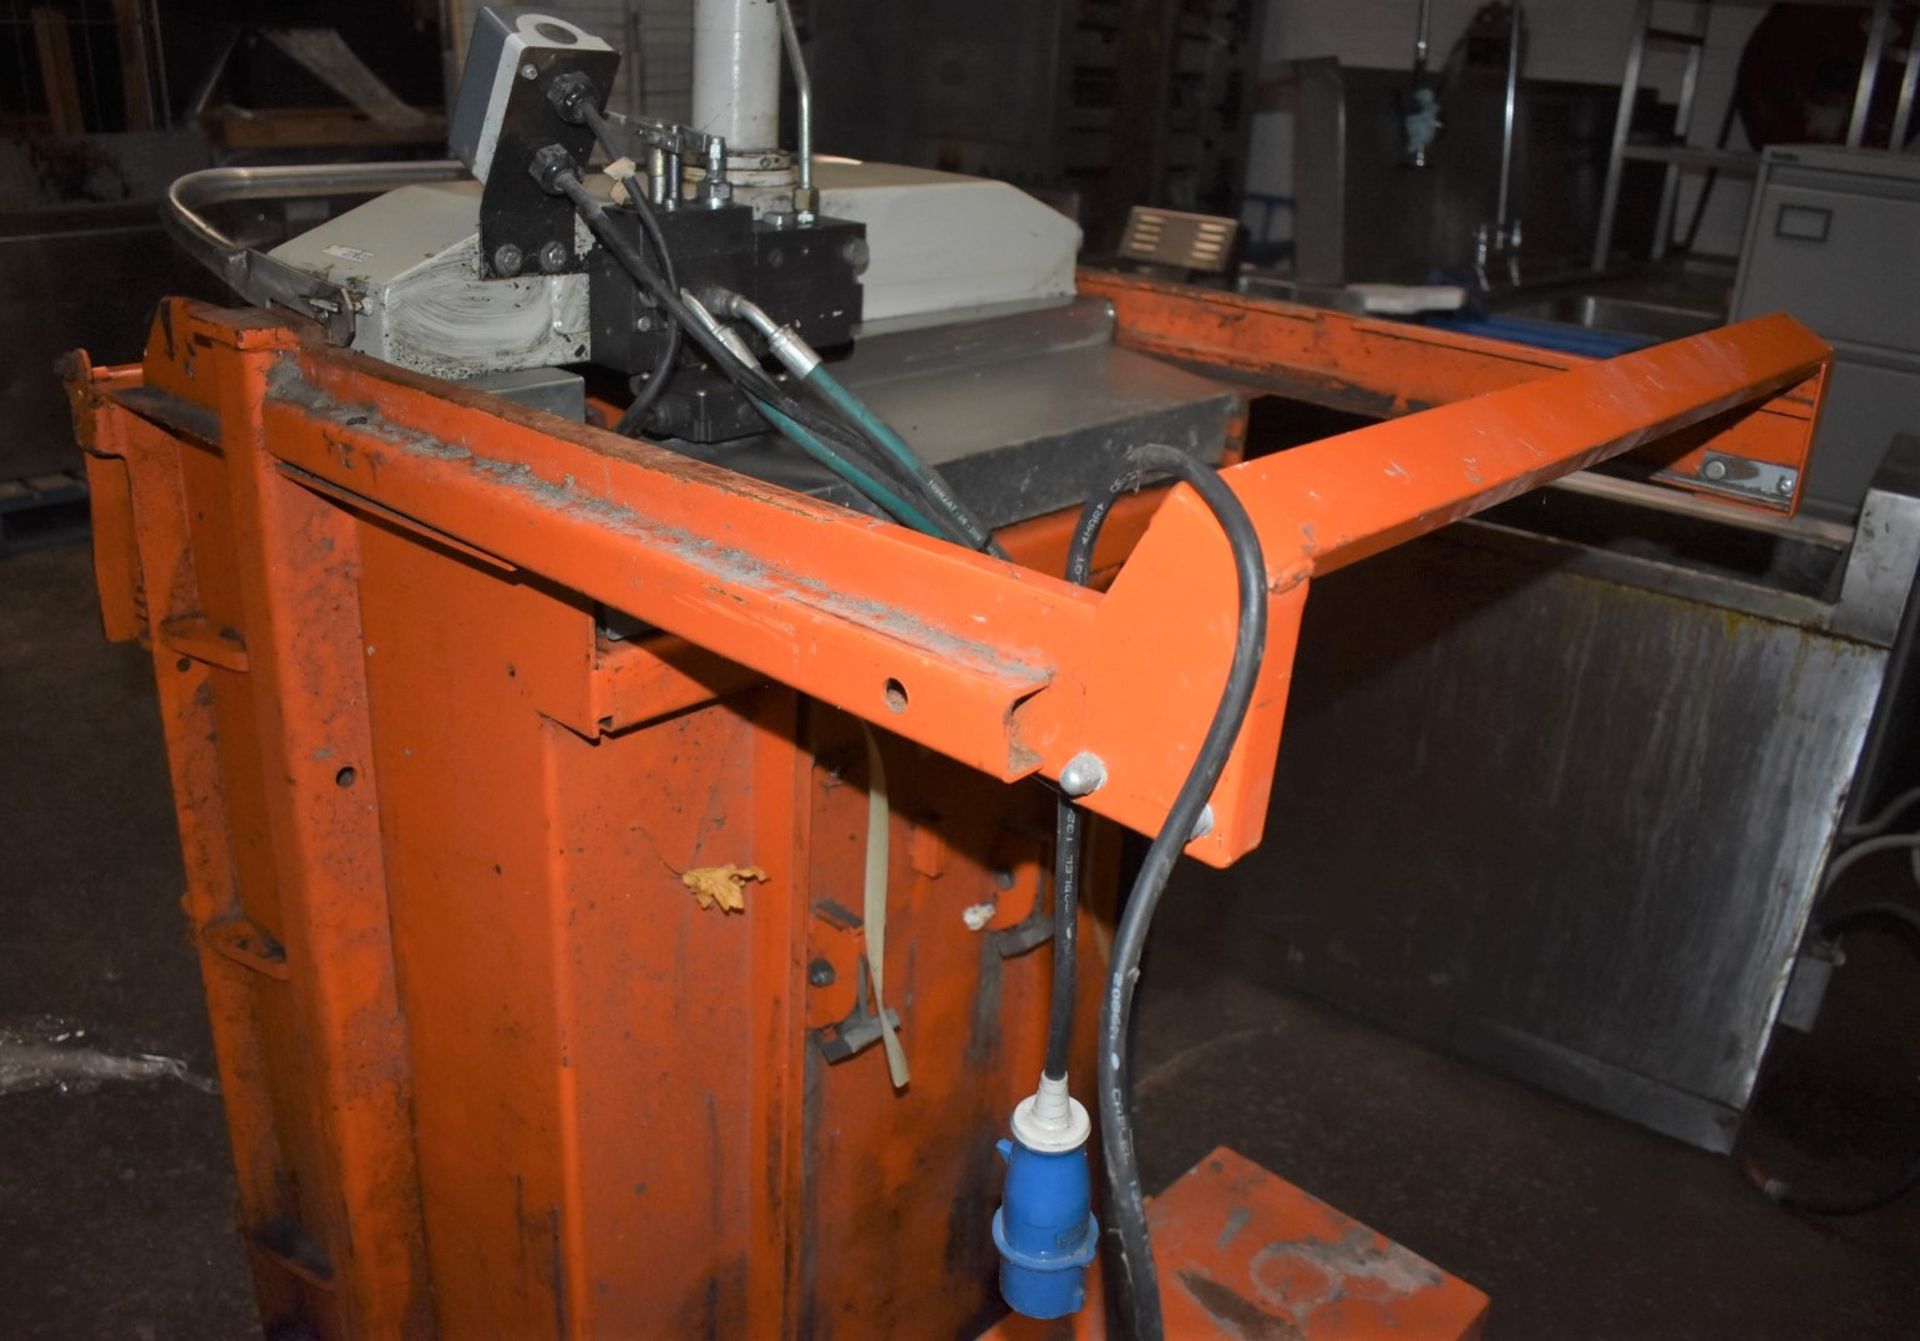 1 x Orwak 5010 Hydraulic Press Compact Cardboard Baler - Used For Compacting Recyclable or Non- - Image 3 of 15